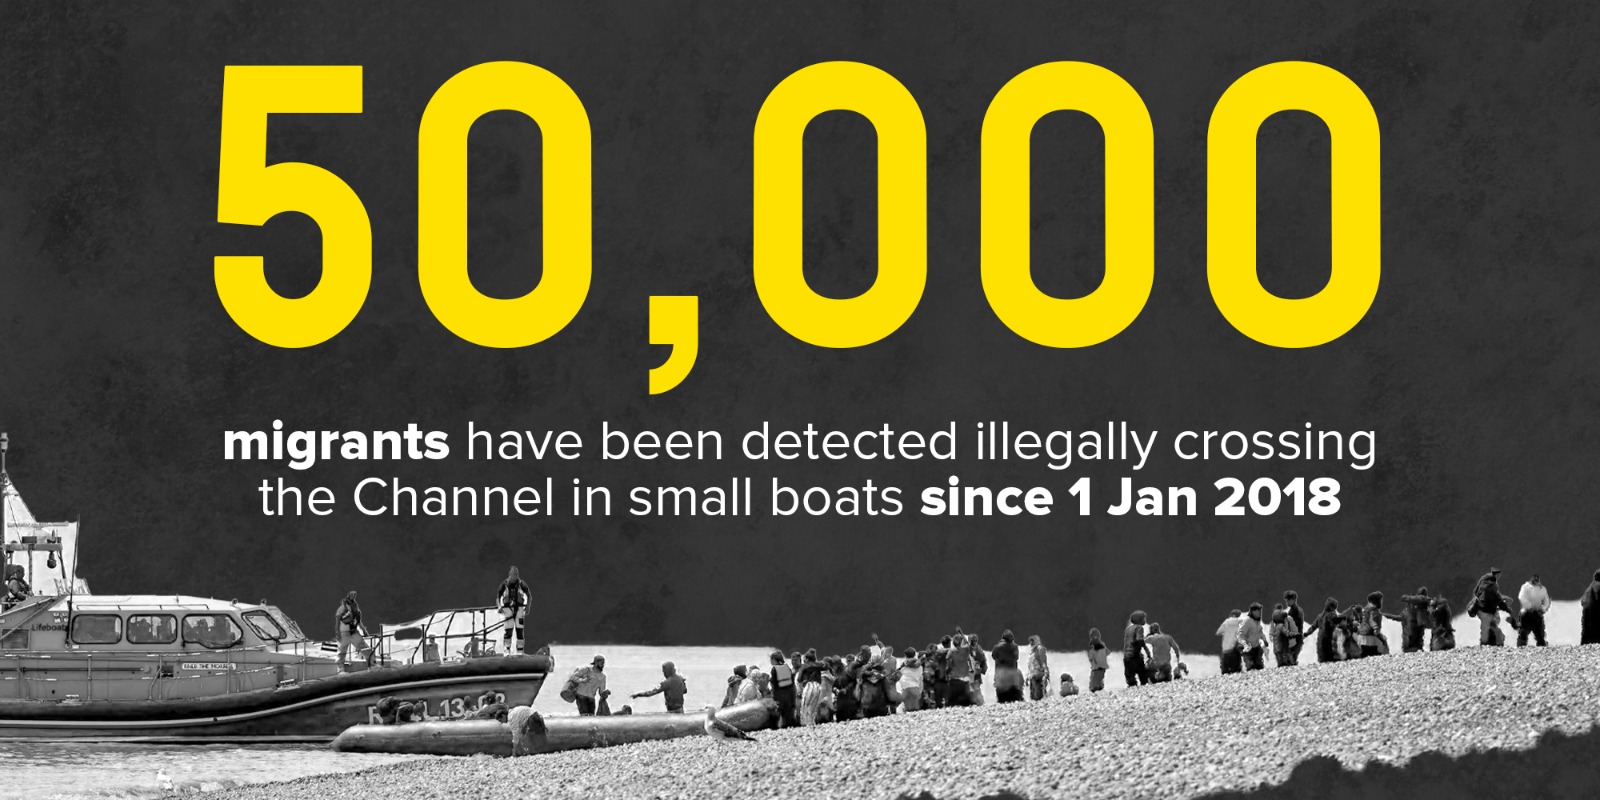 quick-facts-on-illegal-boat-crossings